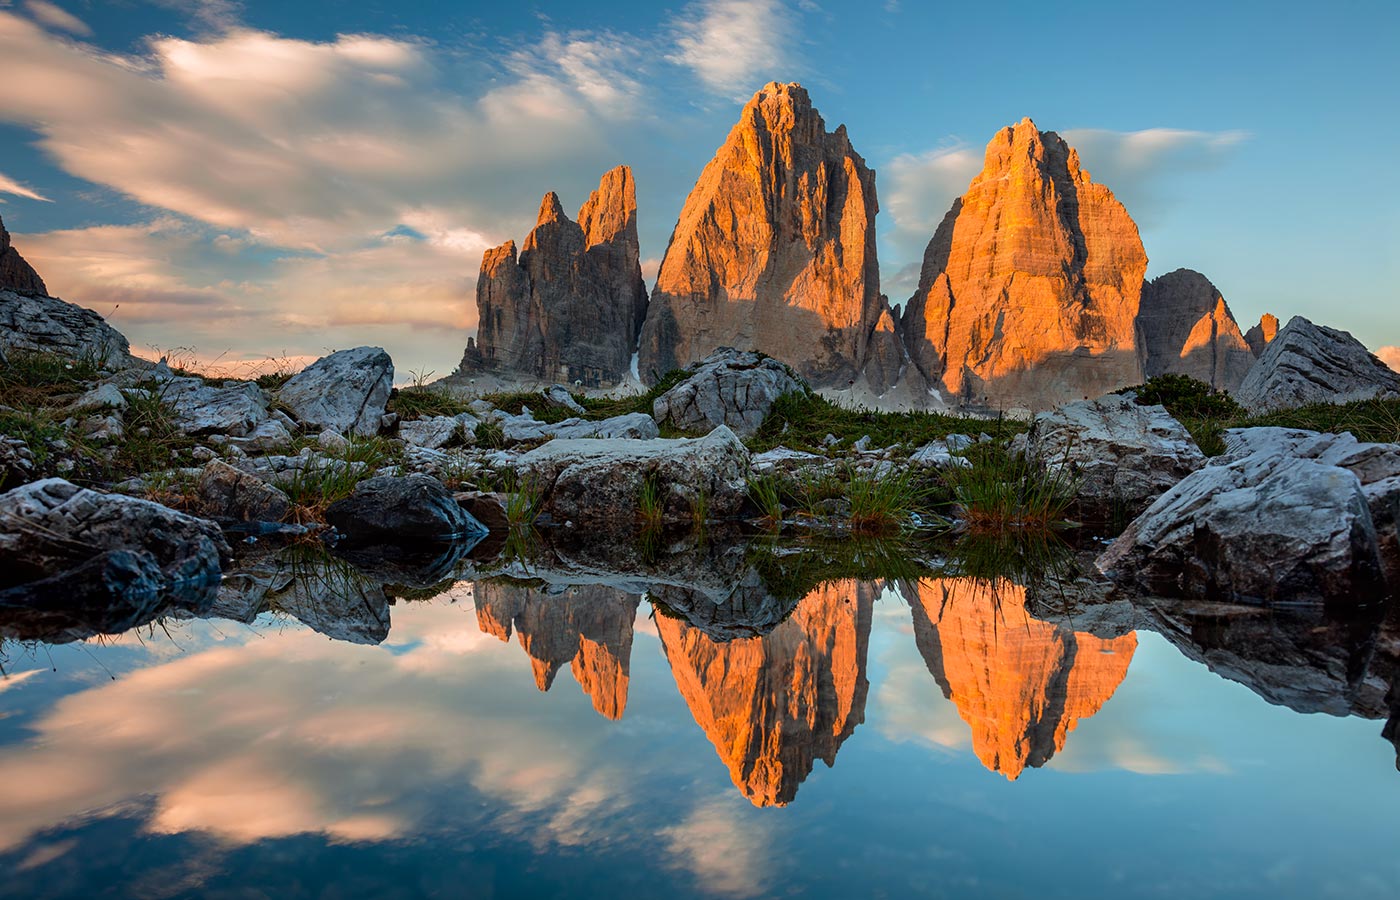 The three peaks of Lavaredo in the heart of the Dolomites